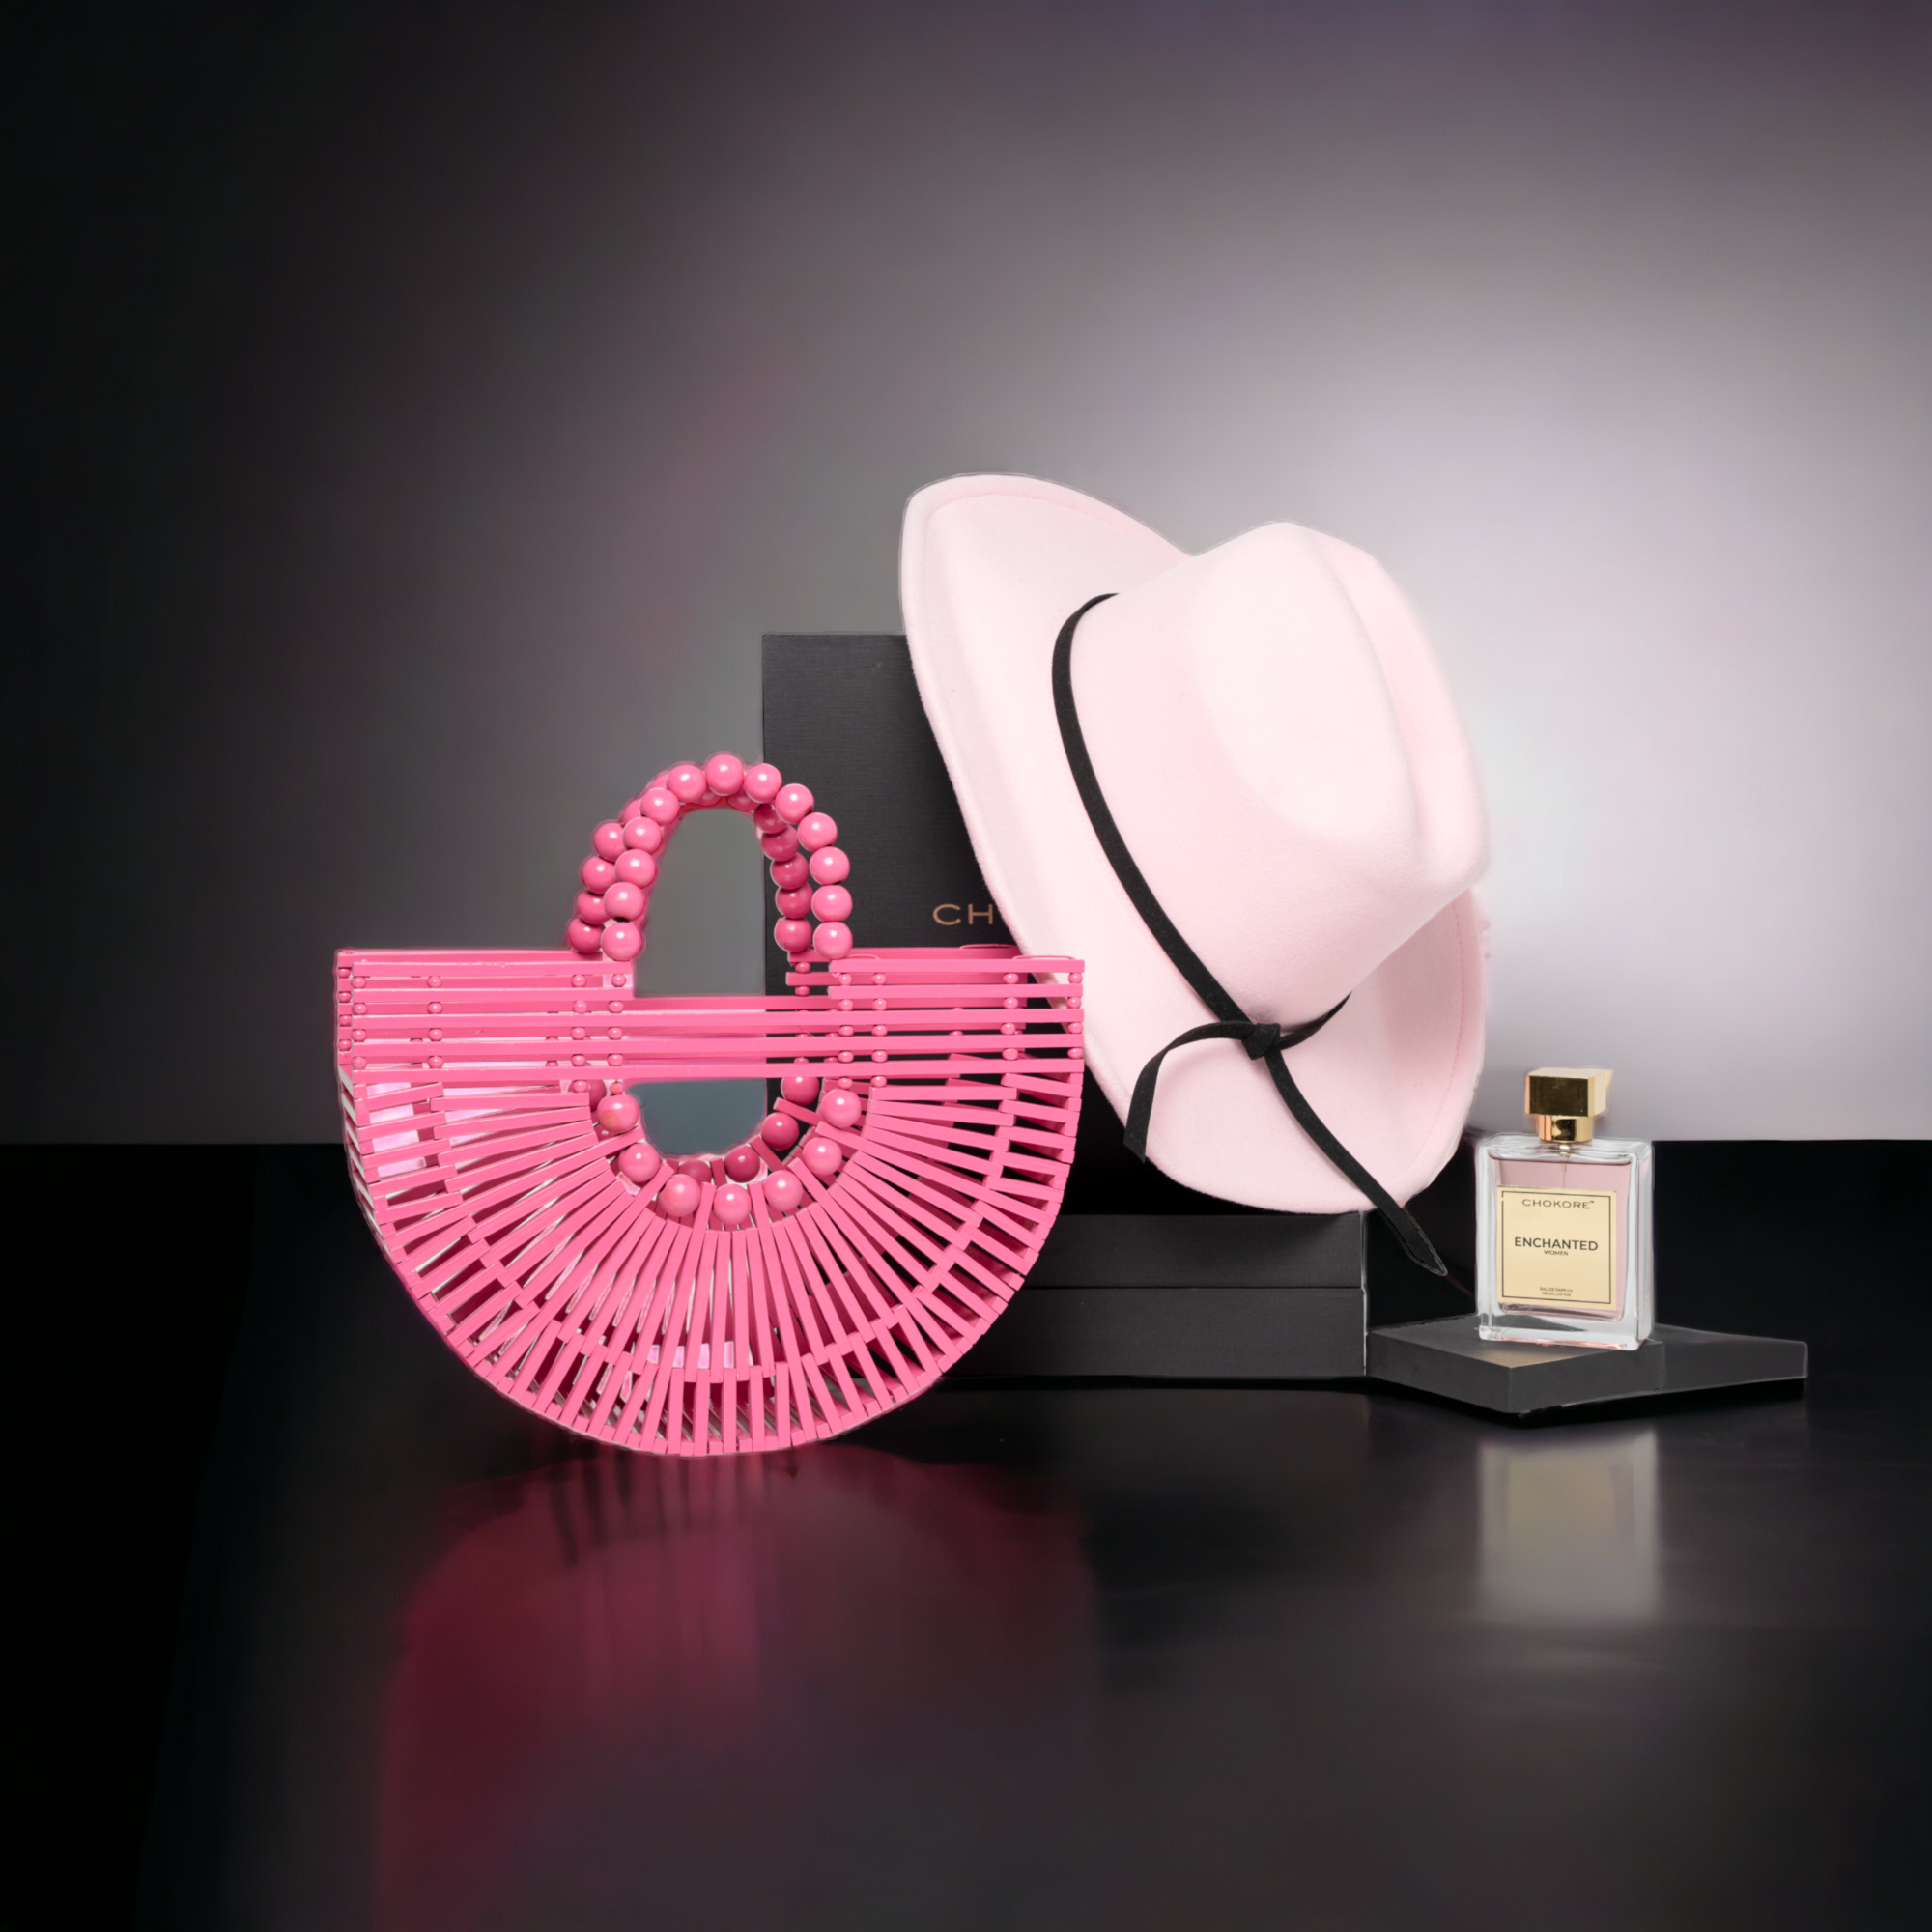 Chokore Special 3-in-1 Gift Set for Her (Bamboo Bag Pink, Cowgirl Hat, & 100 ml Enchanted Perfume)